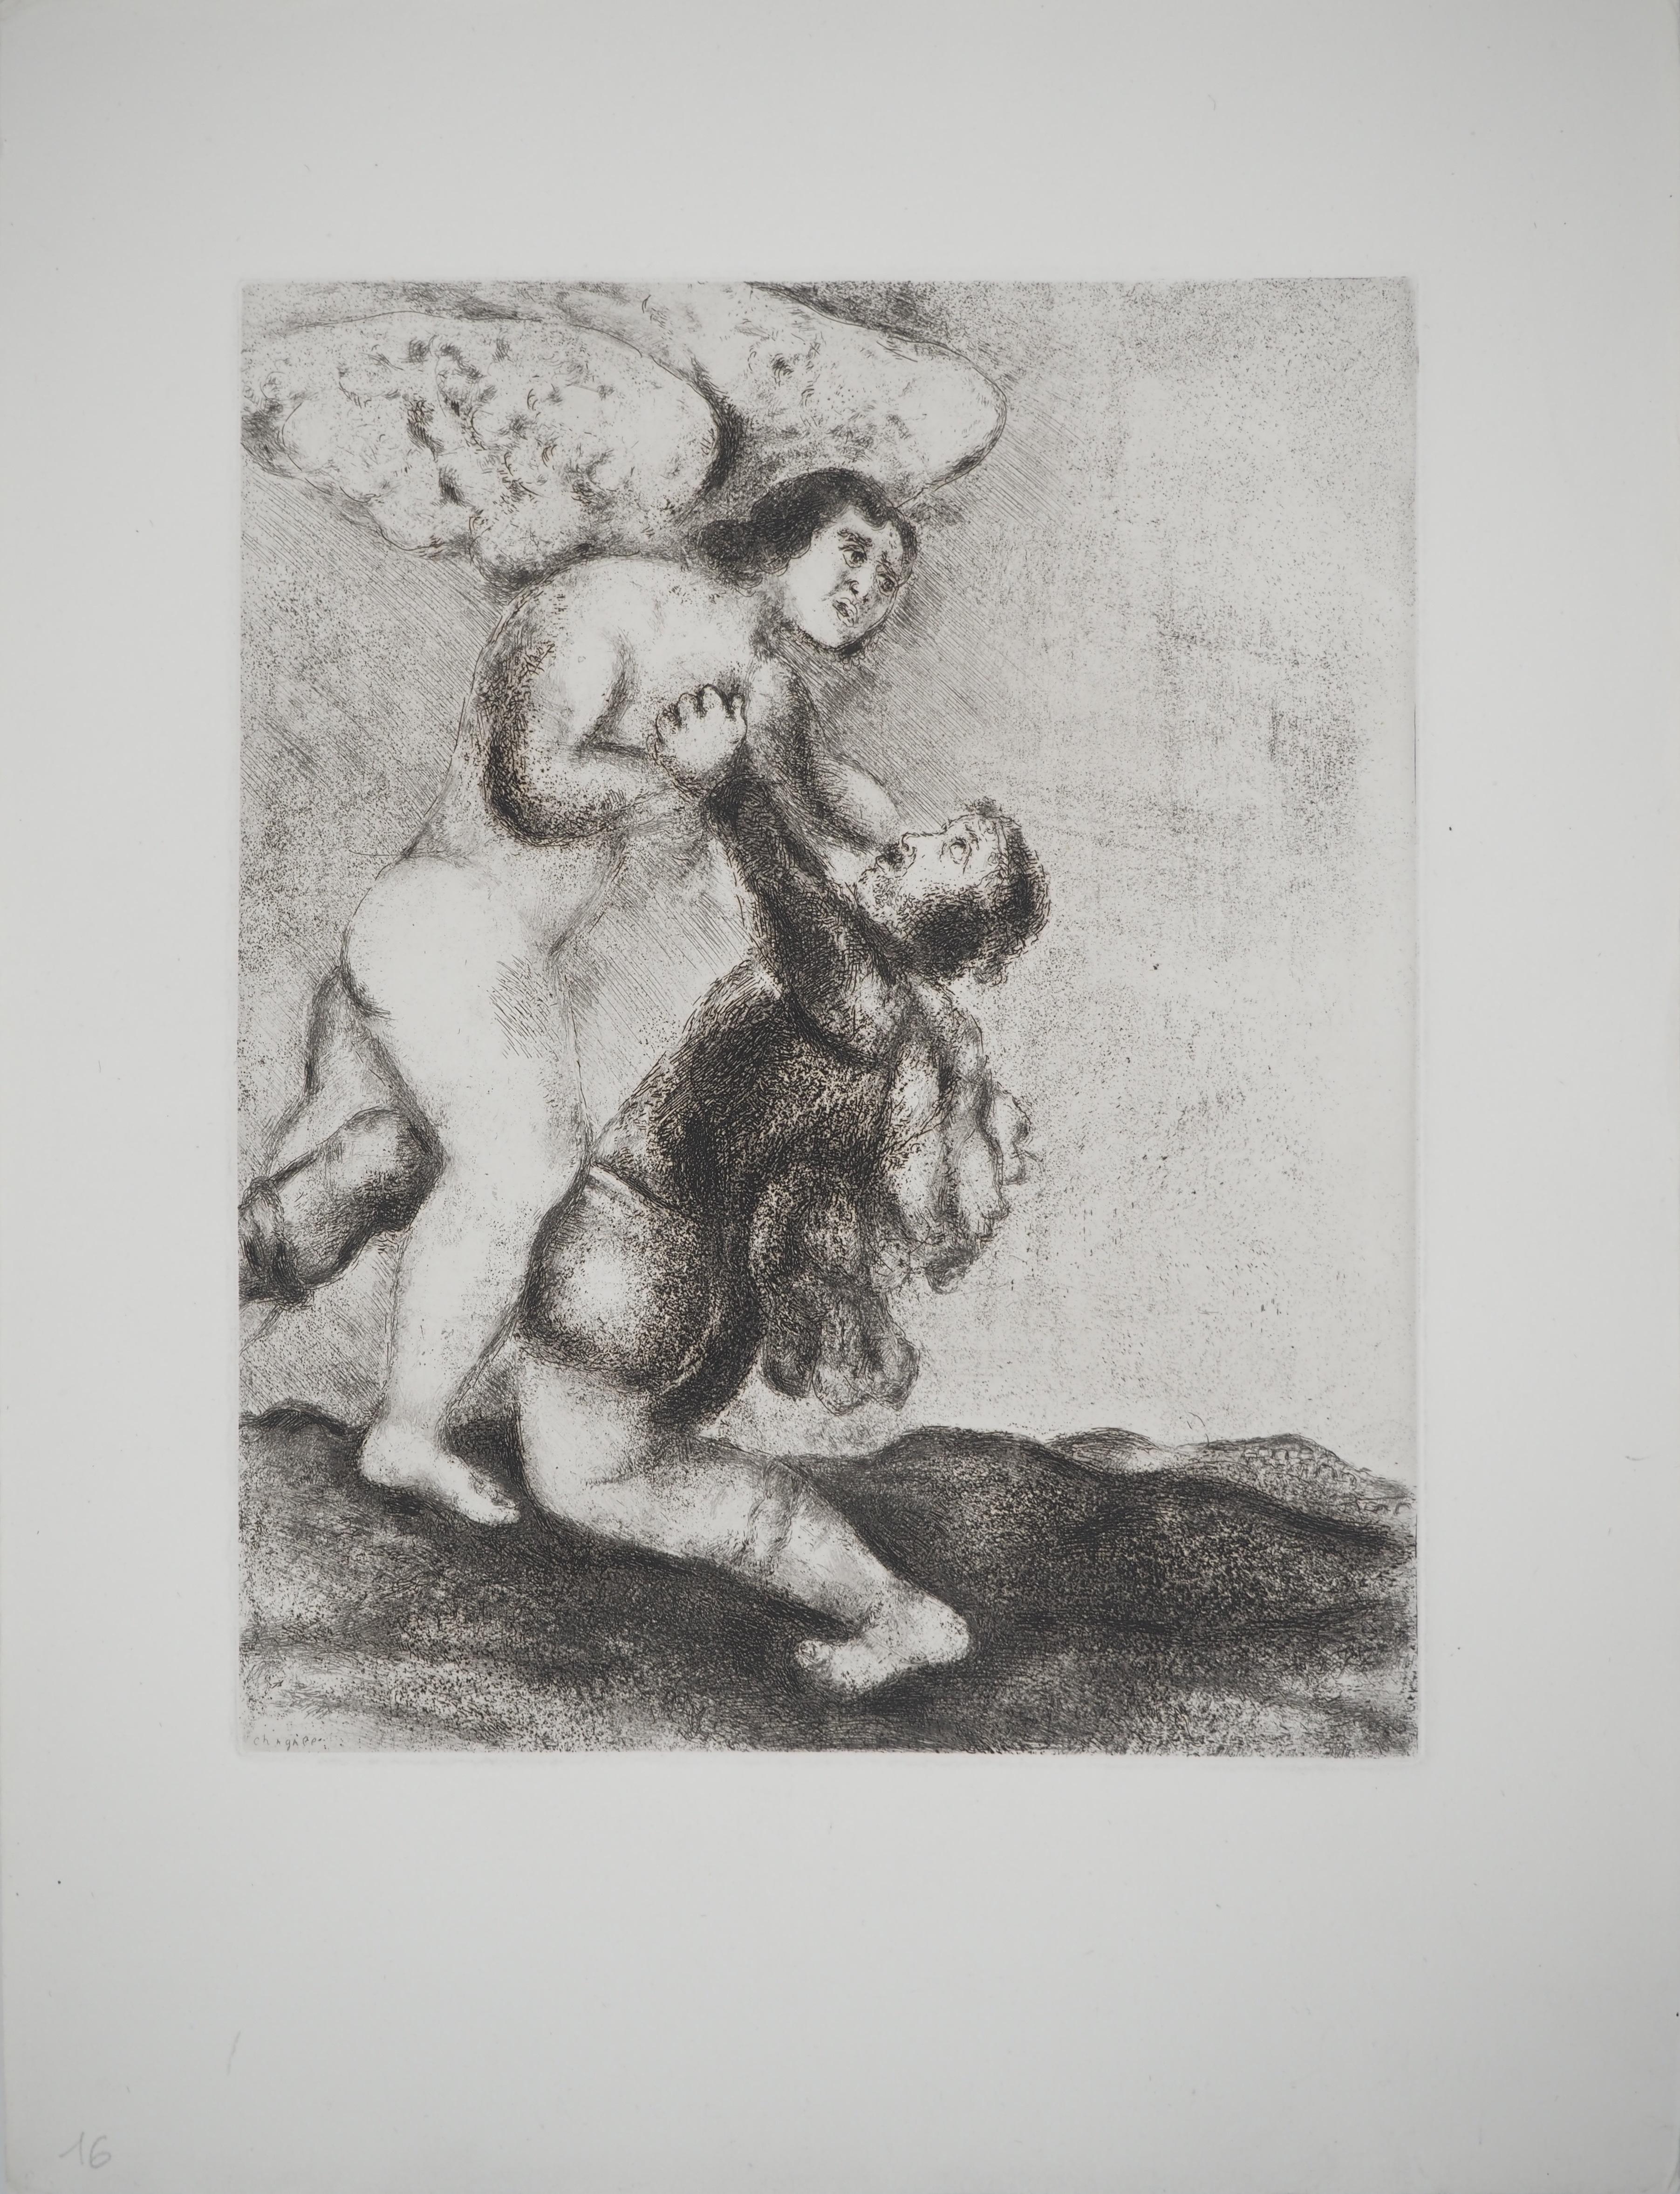 Figurative Print Marc Chagall - Bible : The fight with the angel, 1939 - eau-forte originale